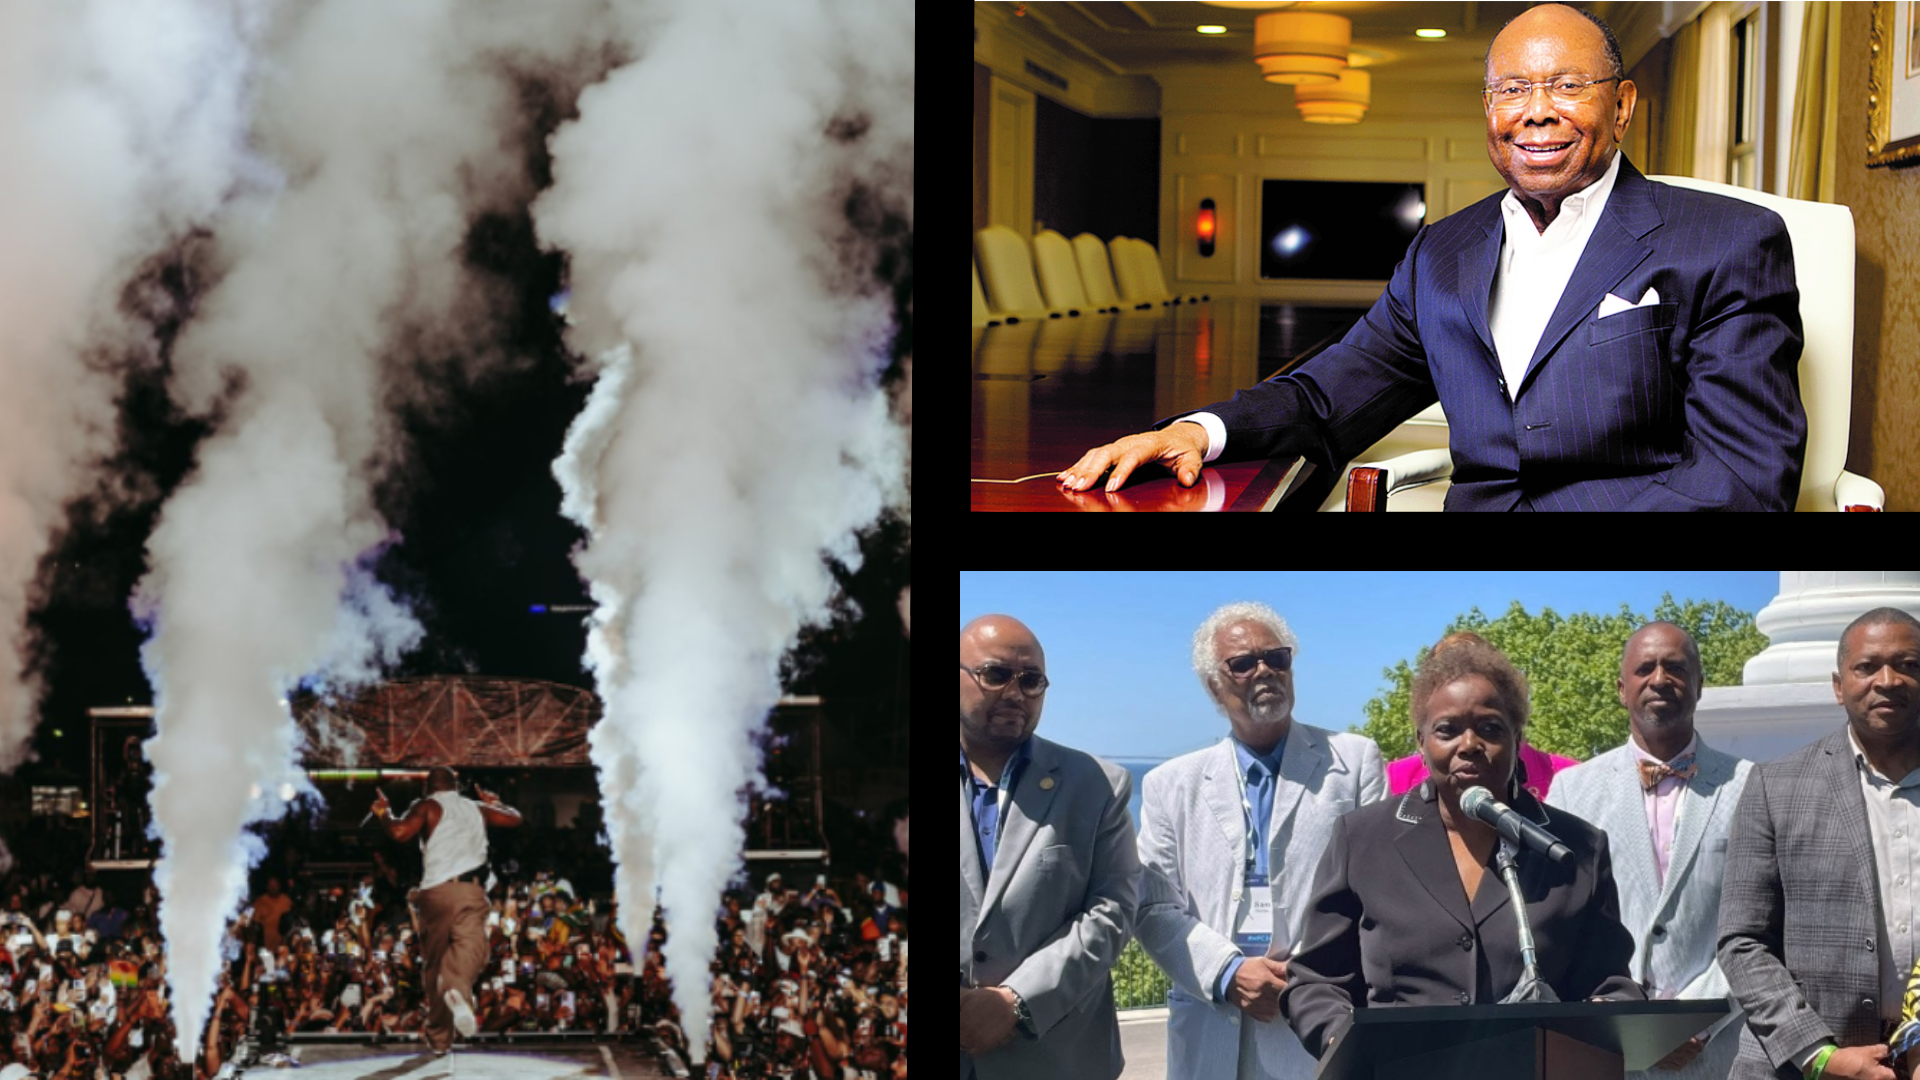 Here are the top stories from the Michigan Chronicle impacting Detroit and nationally for the Week of June 8 – June 14.Make sure to follow the Michigan Chronicle on social media where you can see all of our top stories and engage with us!